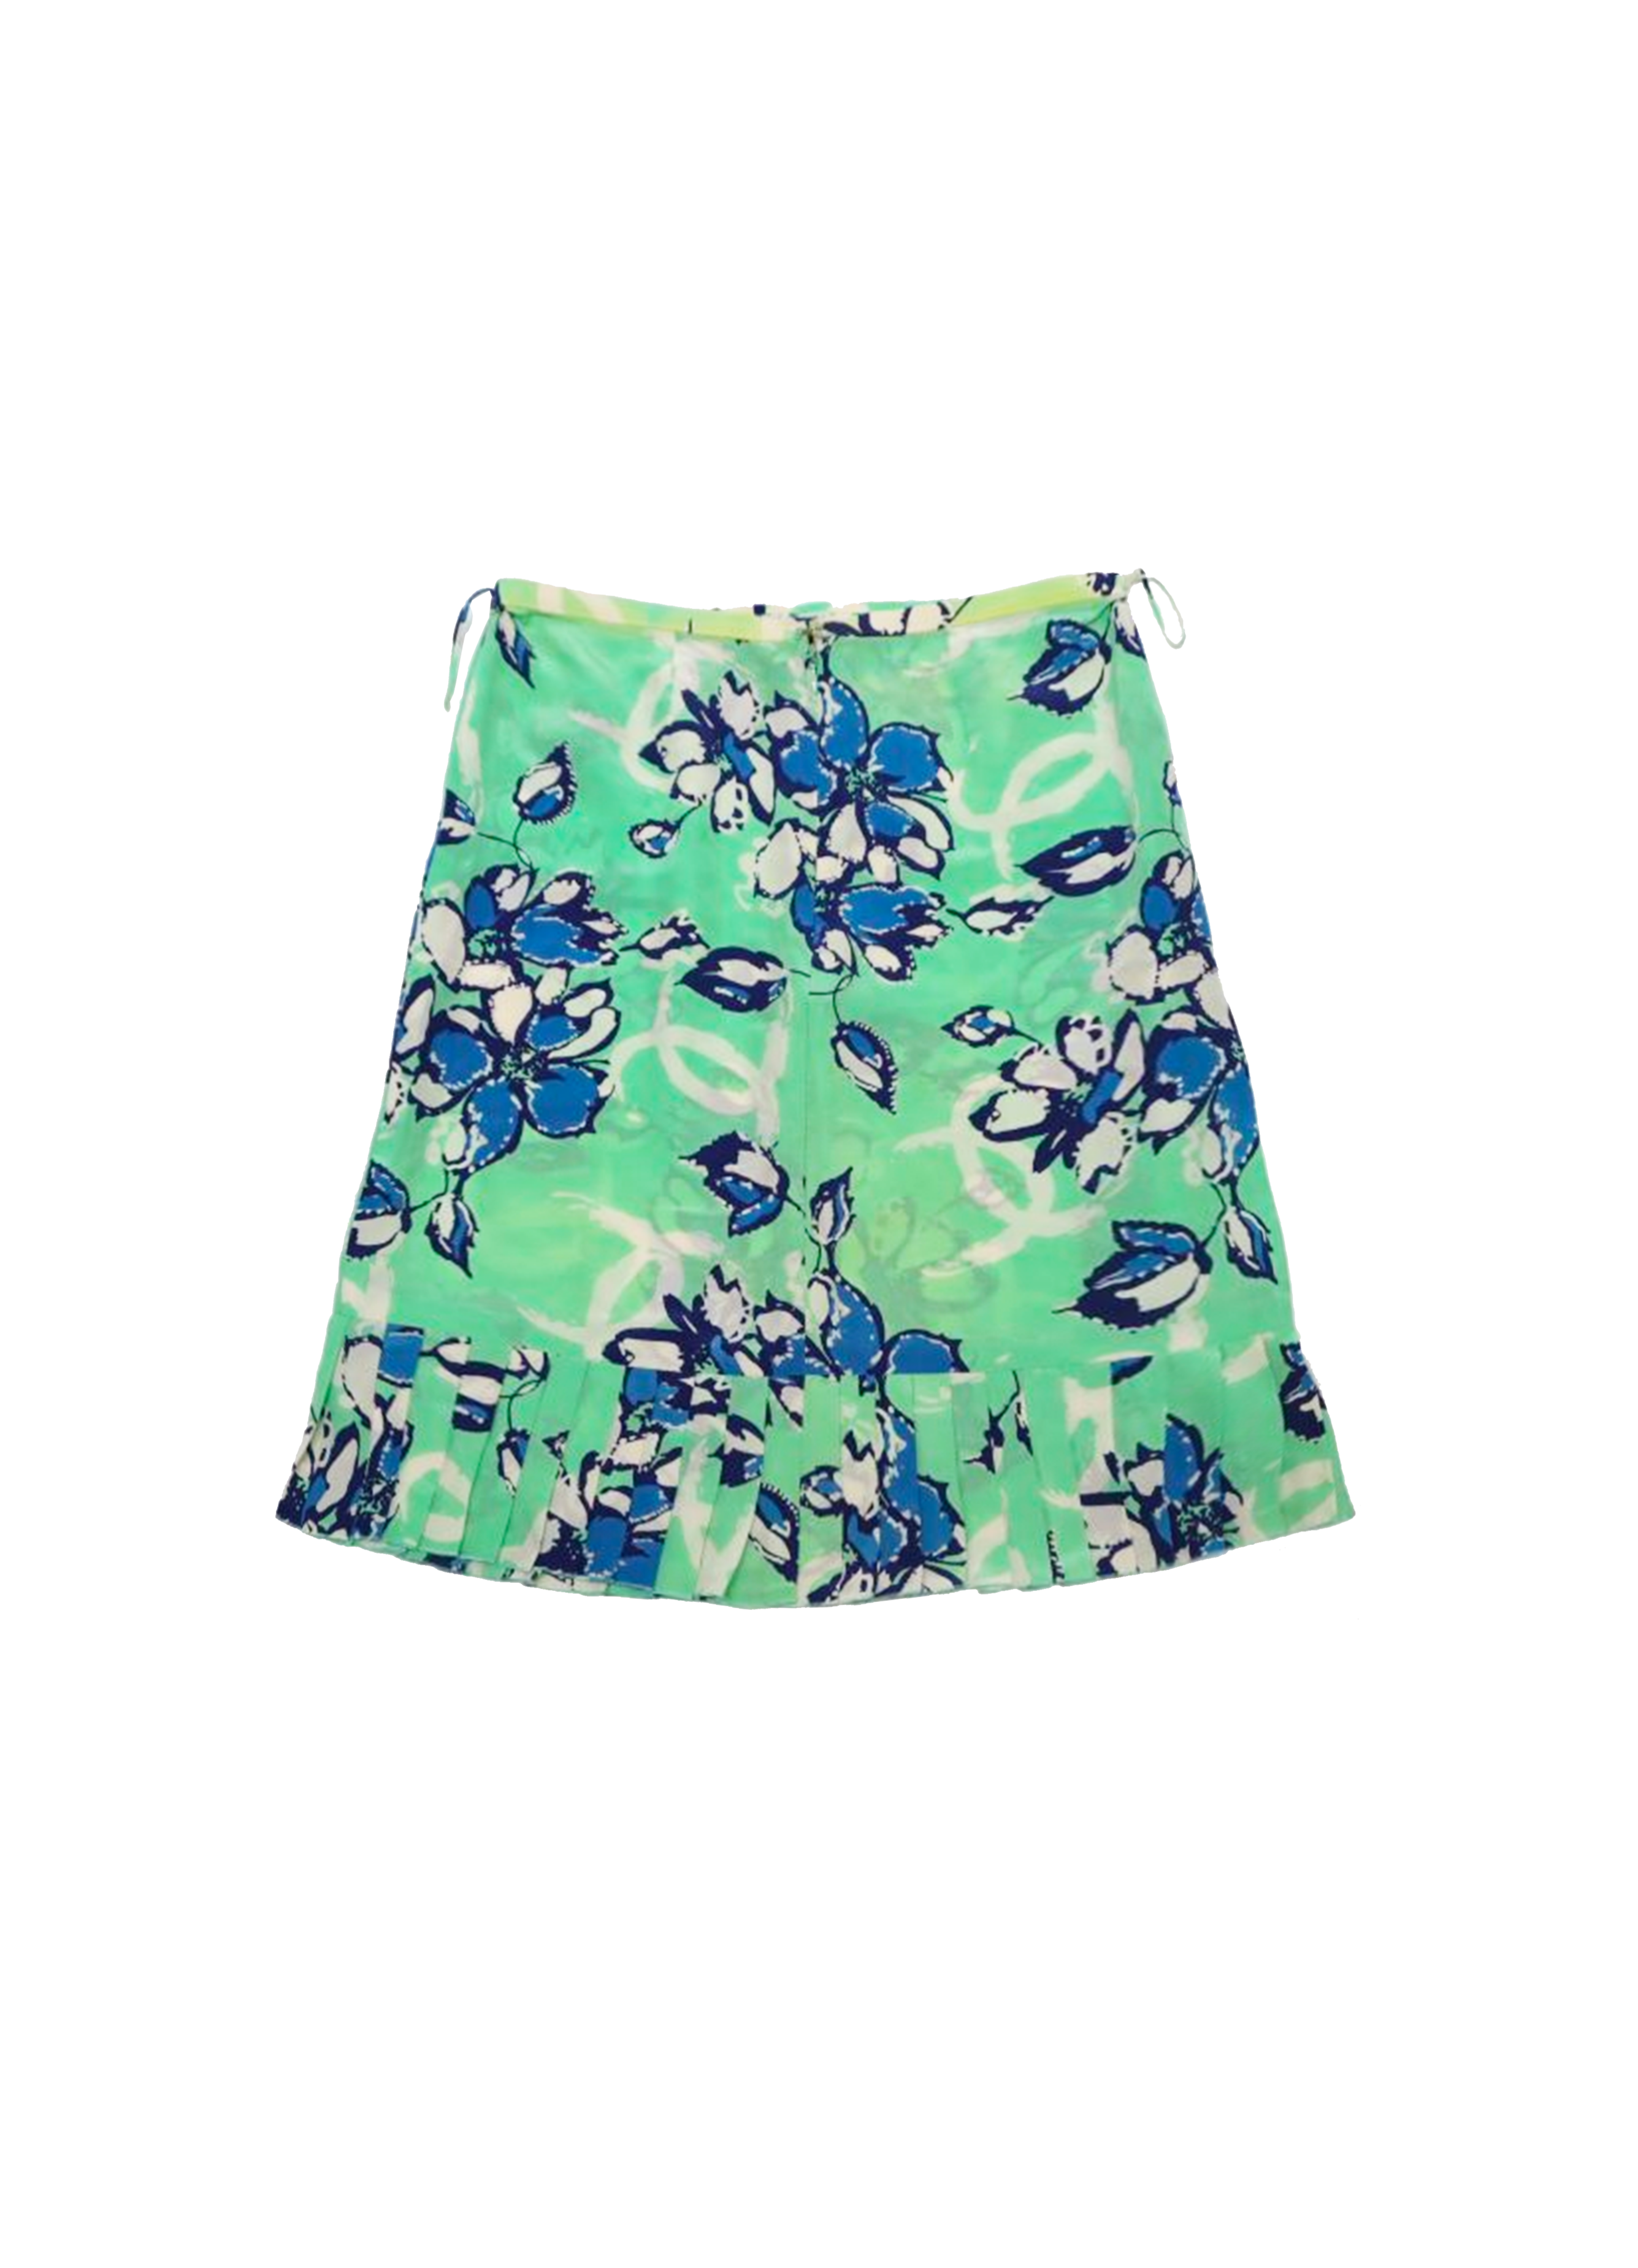 Chanel 2001 SS Floral Green Skirt